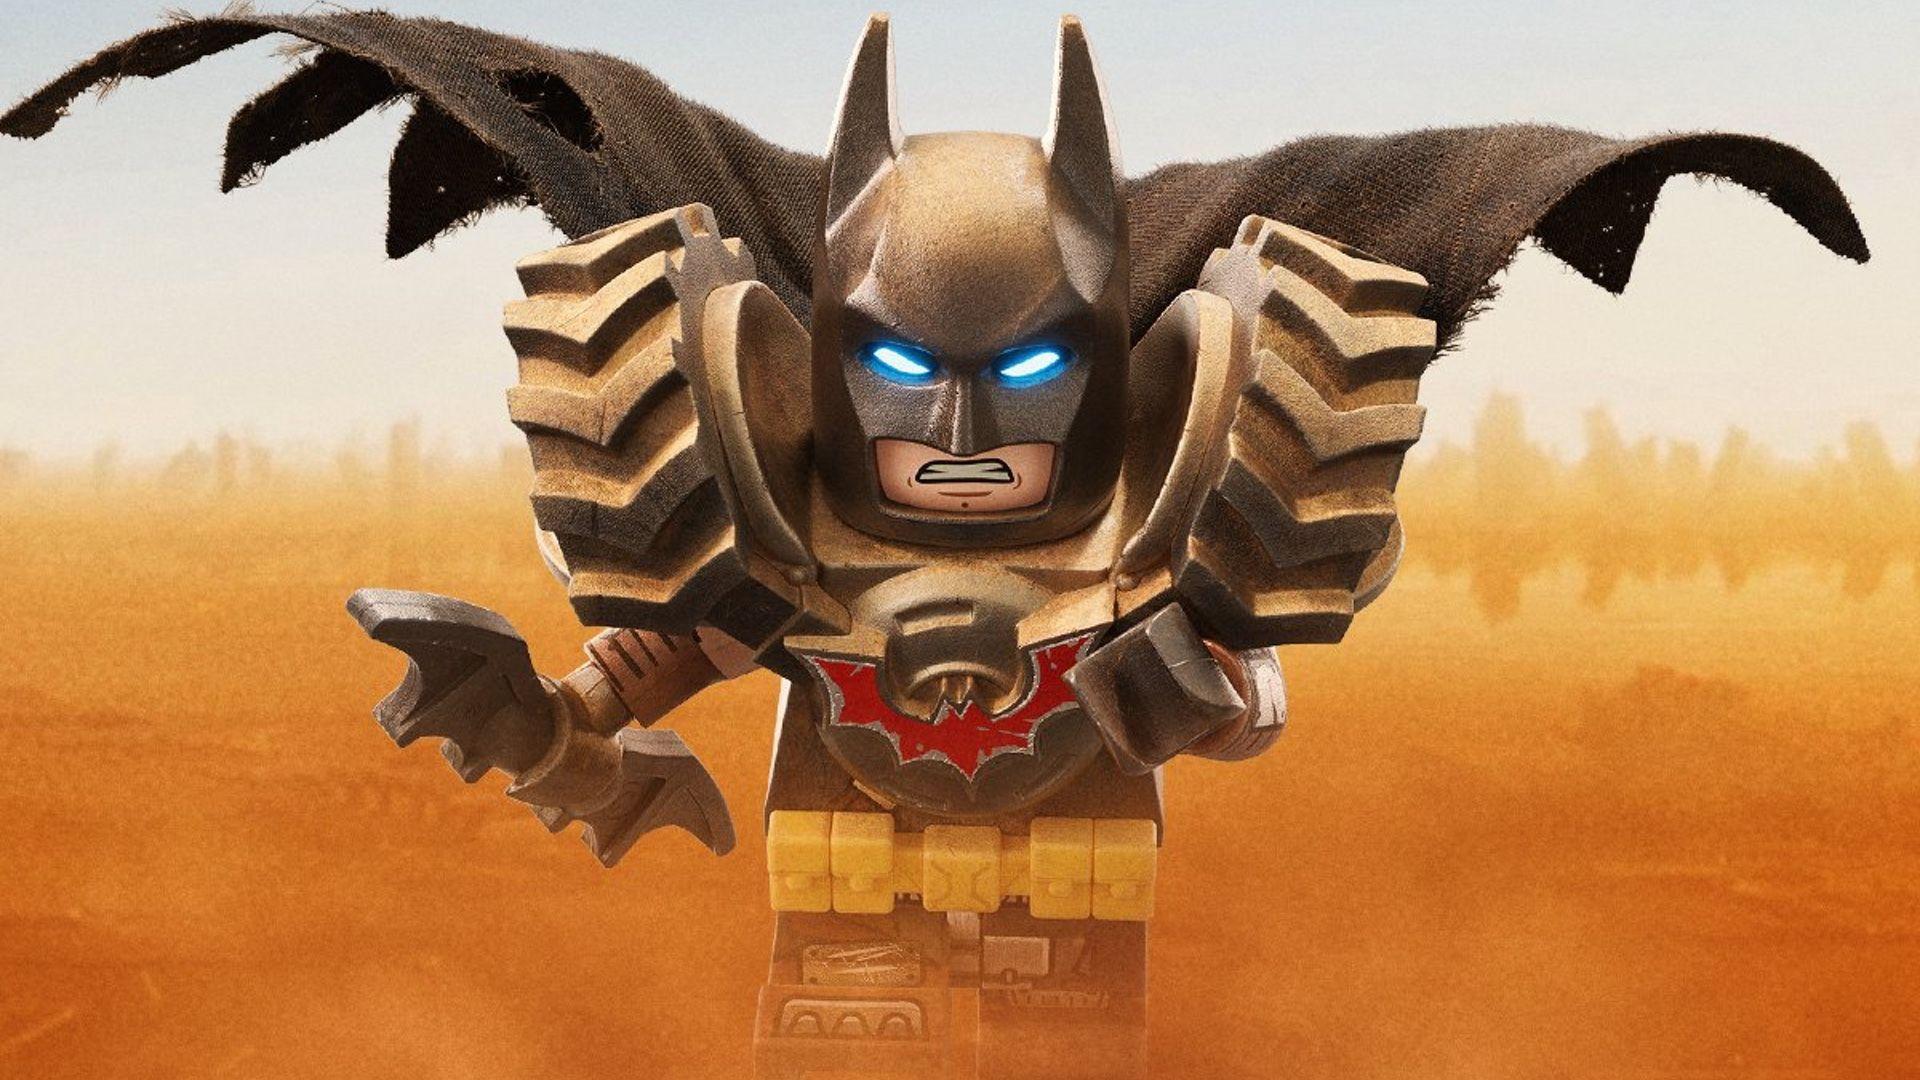 New Justice League Promo Spot for THE LEGO MOVIE 2